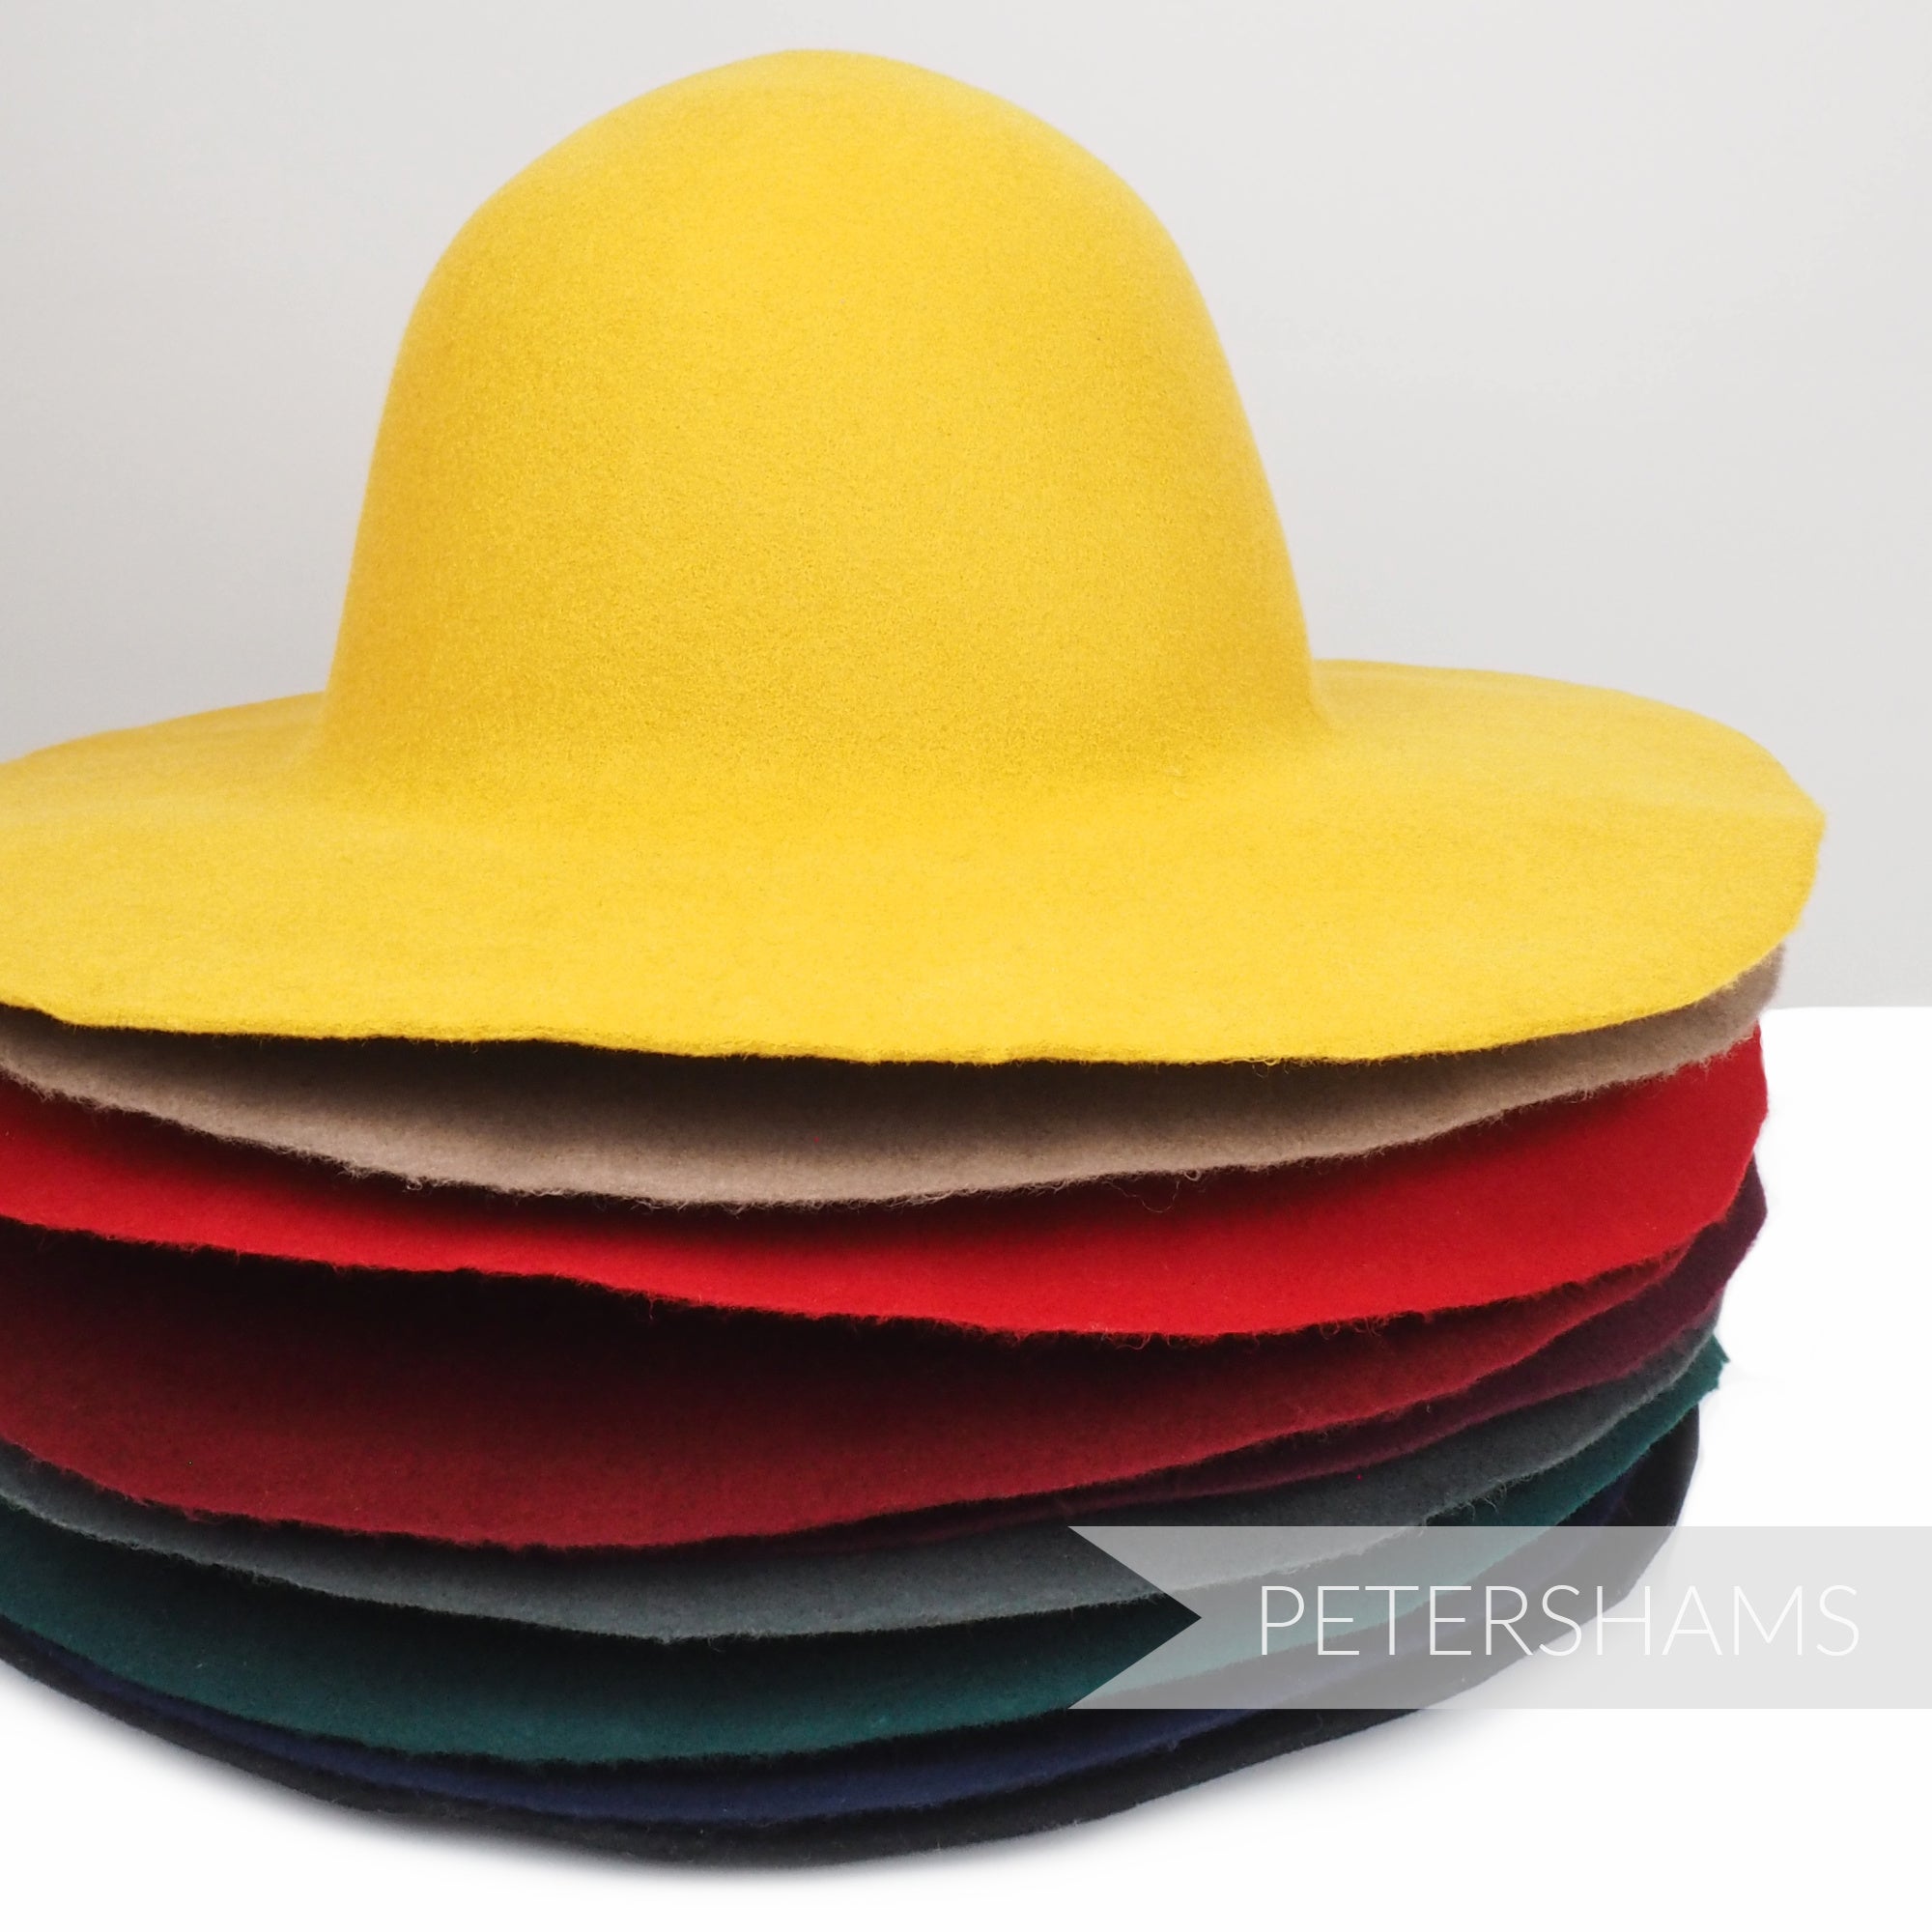 13 Visca Straw Capeline Hat Bodies - Millinery Supply Shop Yellow / V/